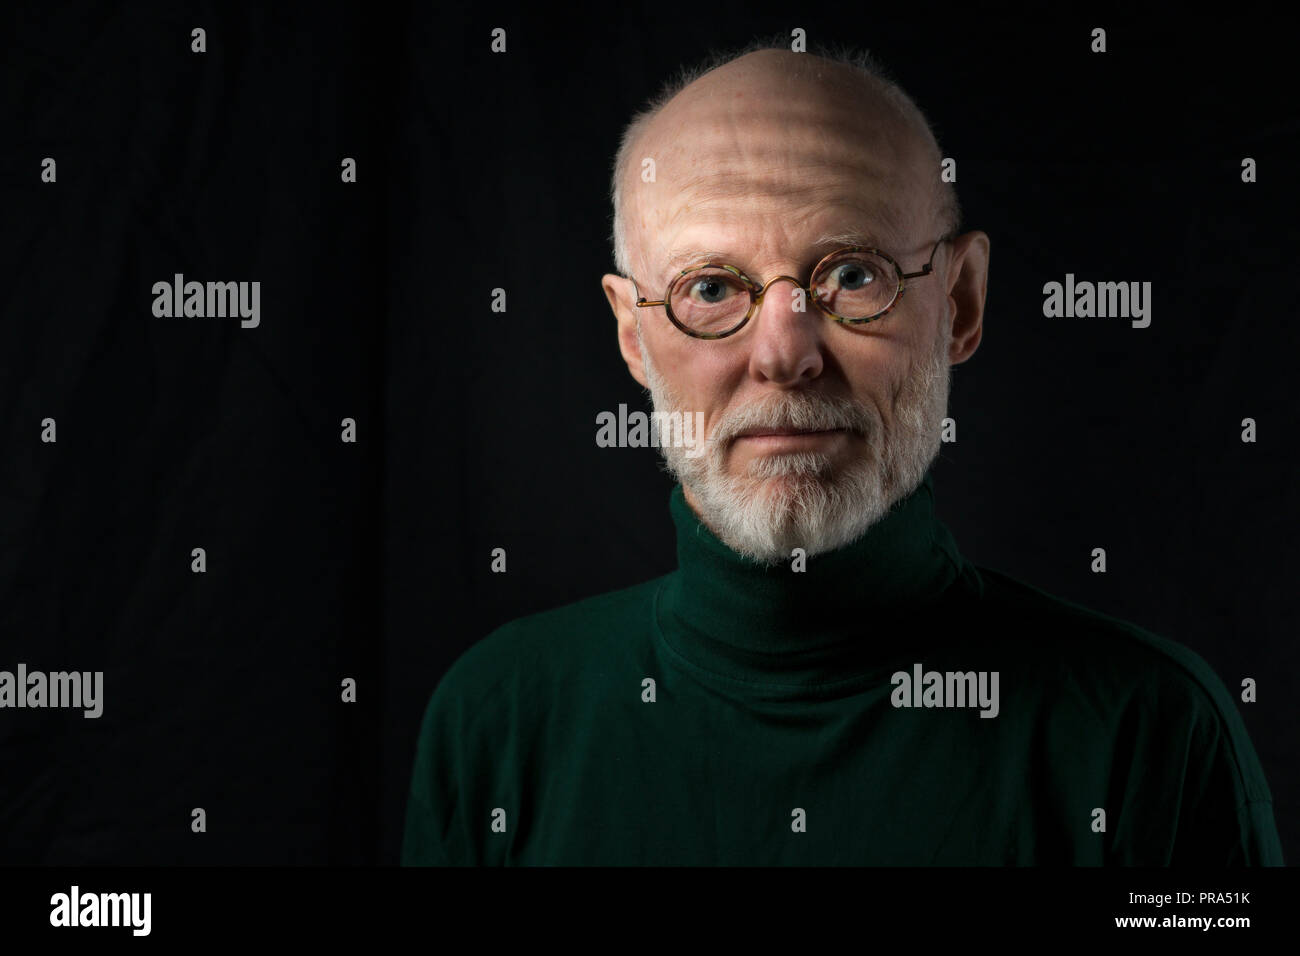 portrait of adult man with glasses on black background Stock Photo